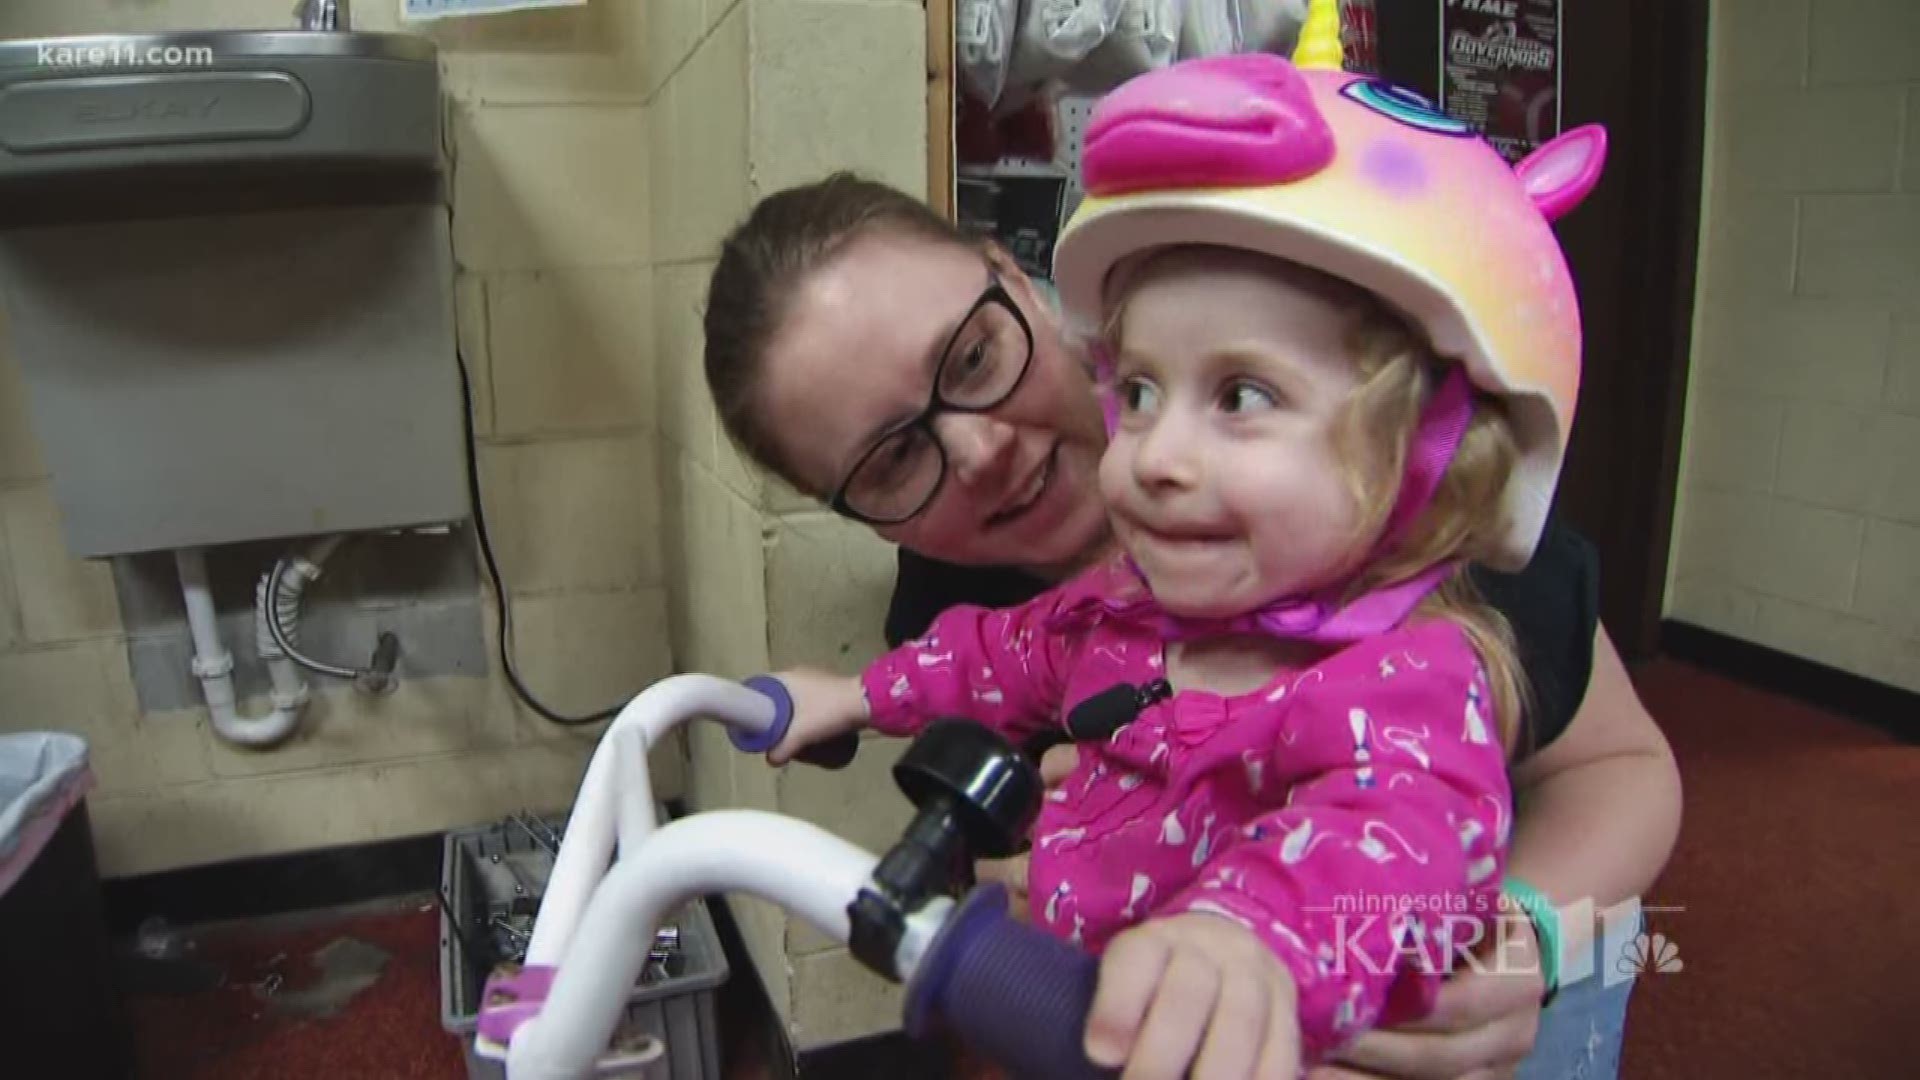 Jack Carlson toils in his garage to make sure all kids have a bike they can ride. http://kare11.tv/2AGp7zr